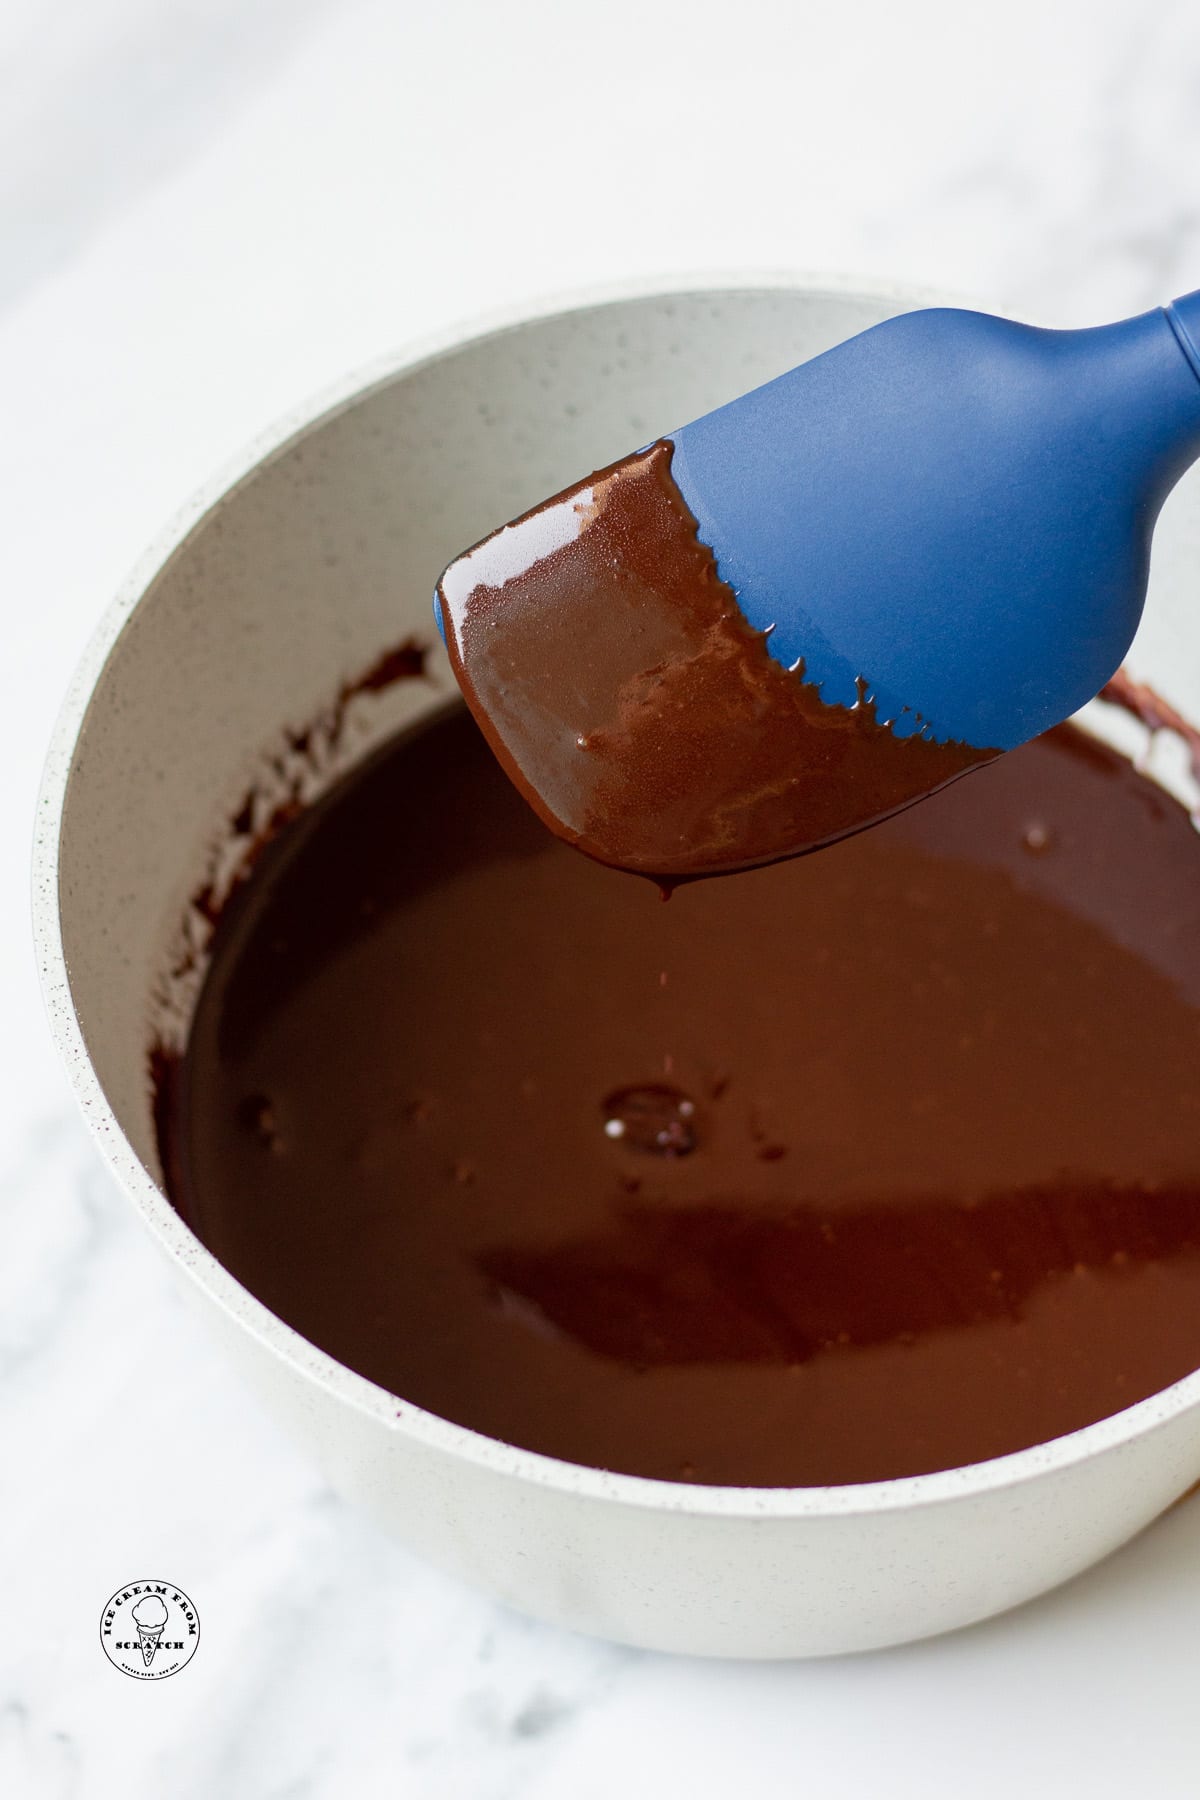 hot fudge sauce in a gray bowl. a blue spatula is holding some up to show the texture and how it sticks to the spoon.